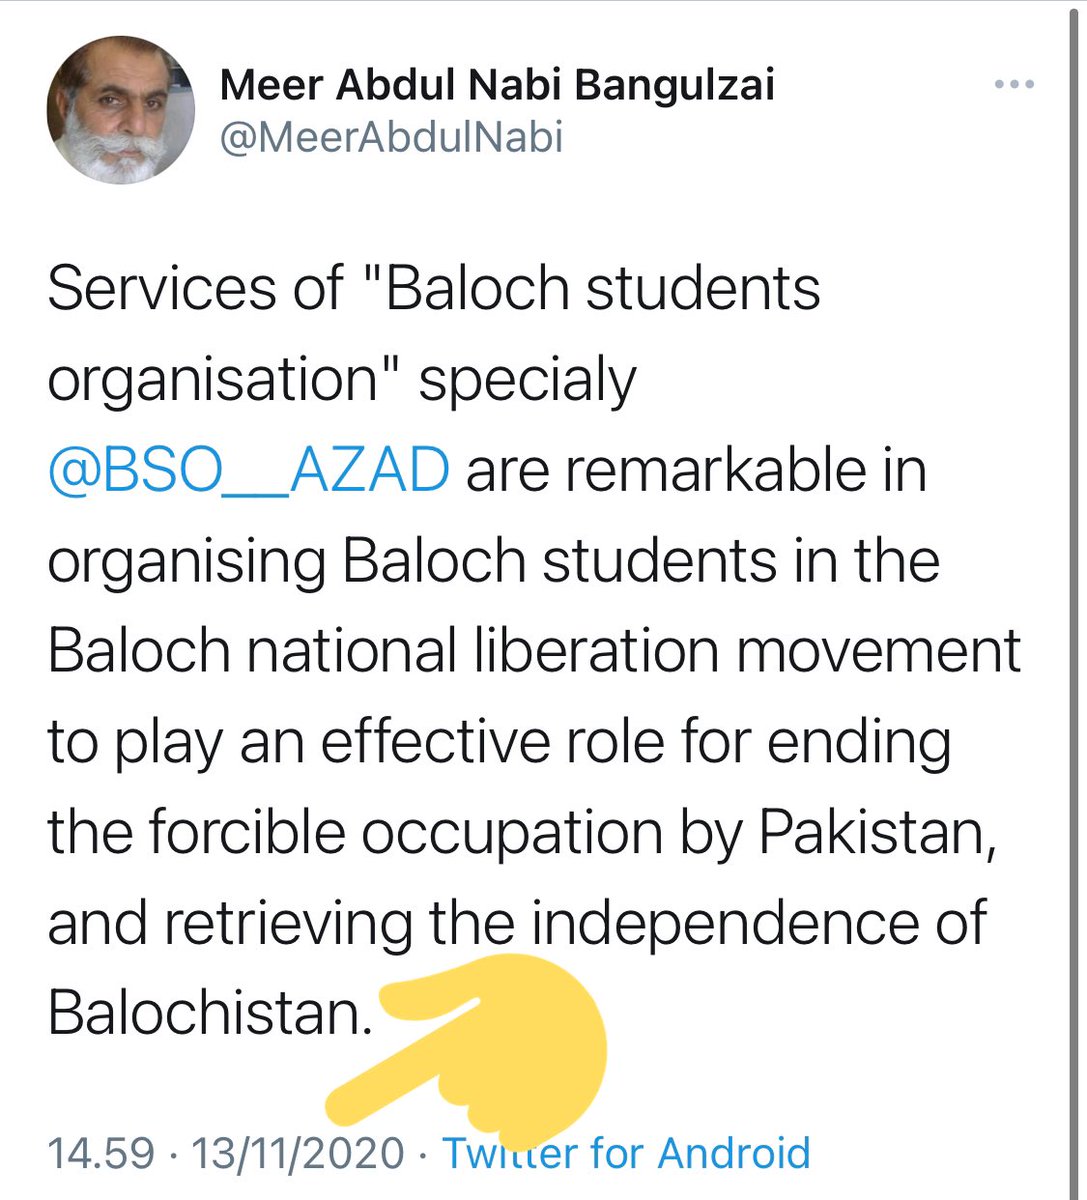 Now the same terrorist commander based in Afghanistan is congratulating BSO-Azad, working under ground in Pakistan just minutes after election of BSO-Azad’s new head.Note how he praises on-ground “REMARKABLE SERVICES” of BSO-Azad in recruiting “organizing baloch students”./6